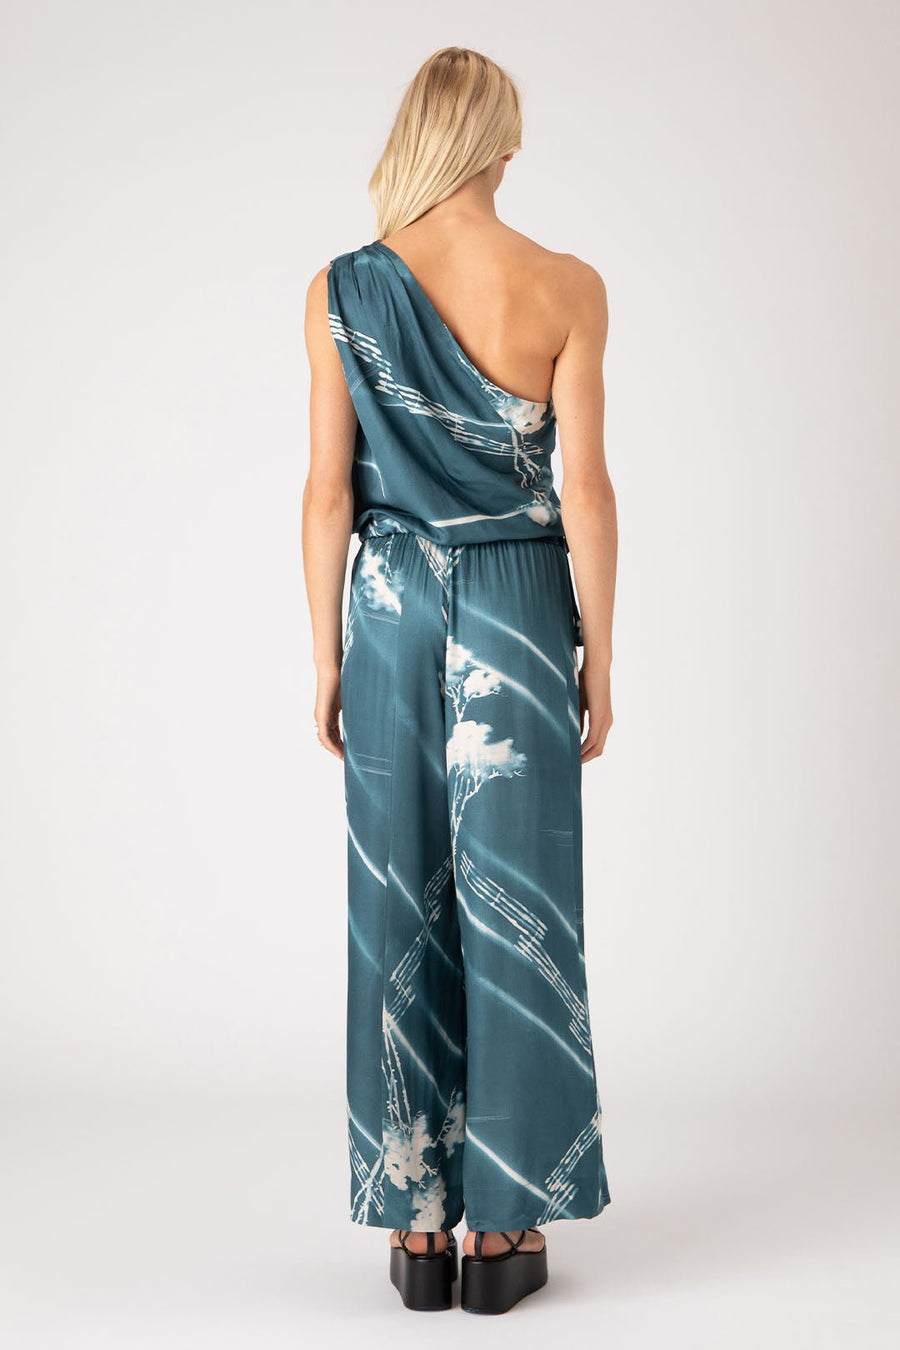 HYDRA WIDE LEG PANT, AEGEAN - Burning Torch Online Boutique